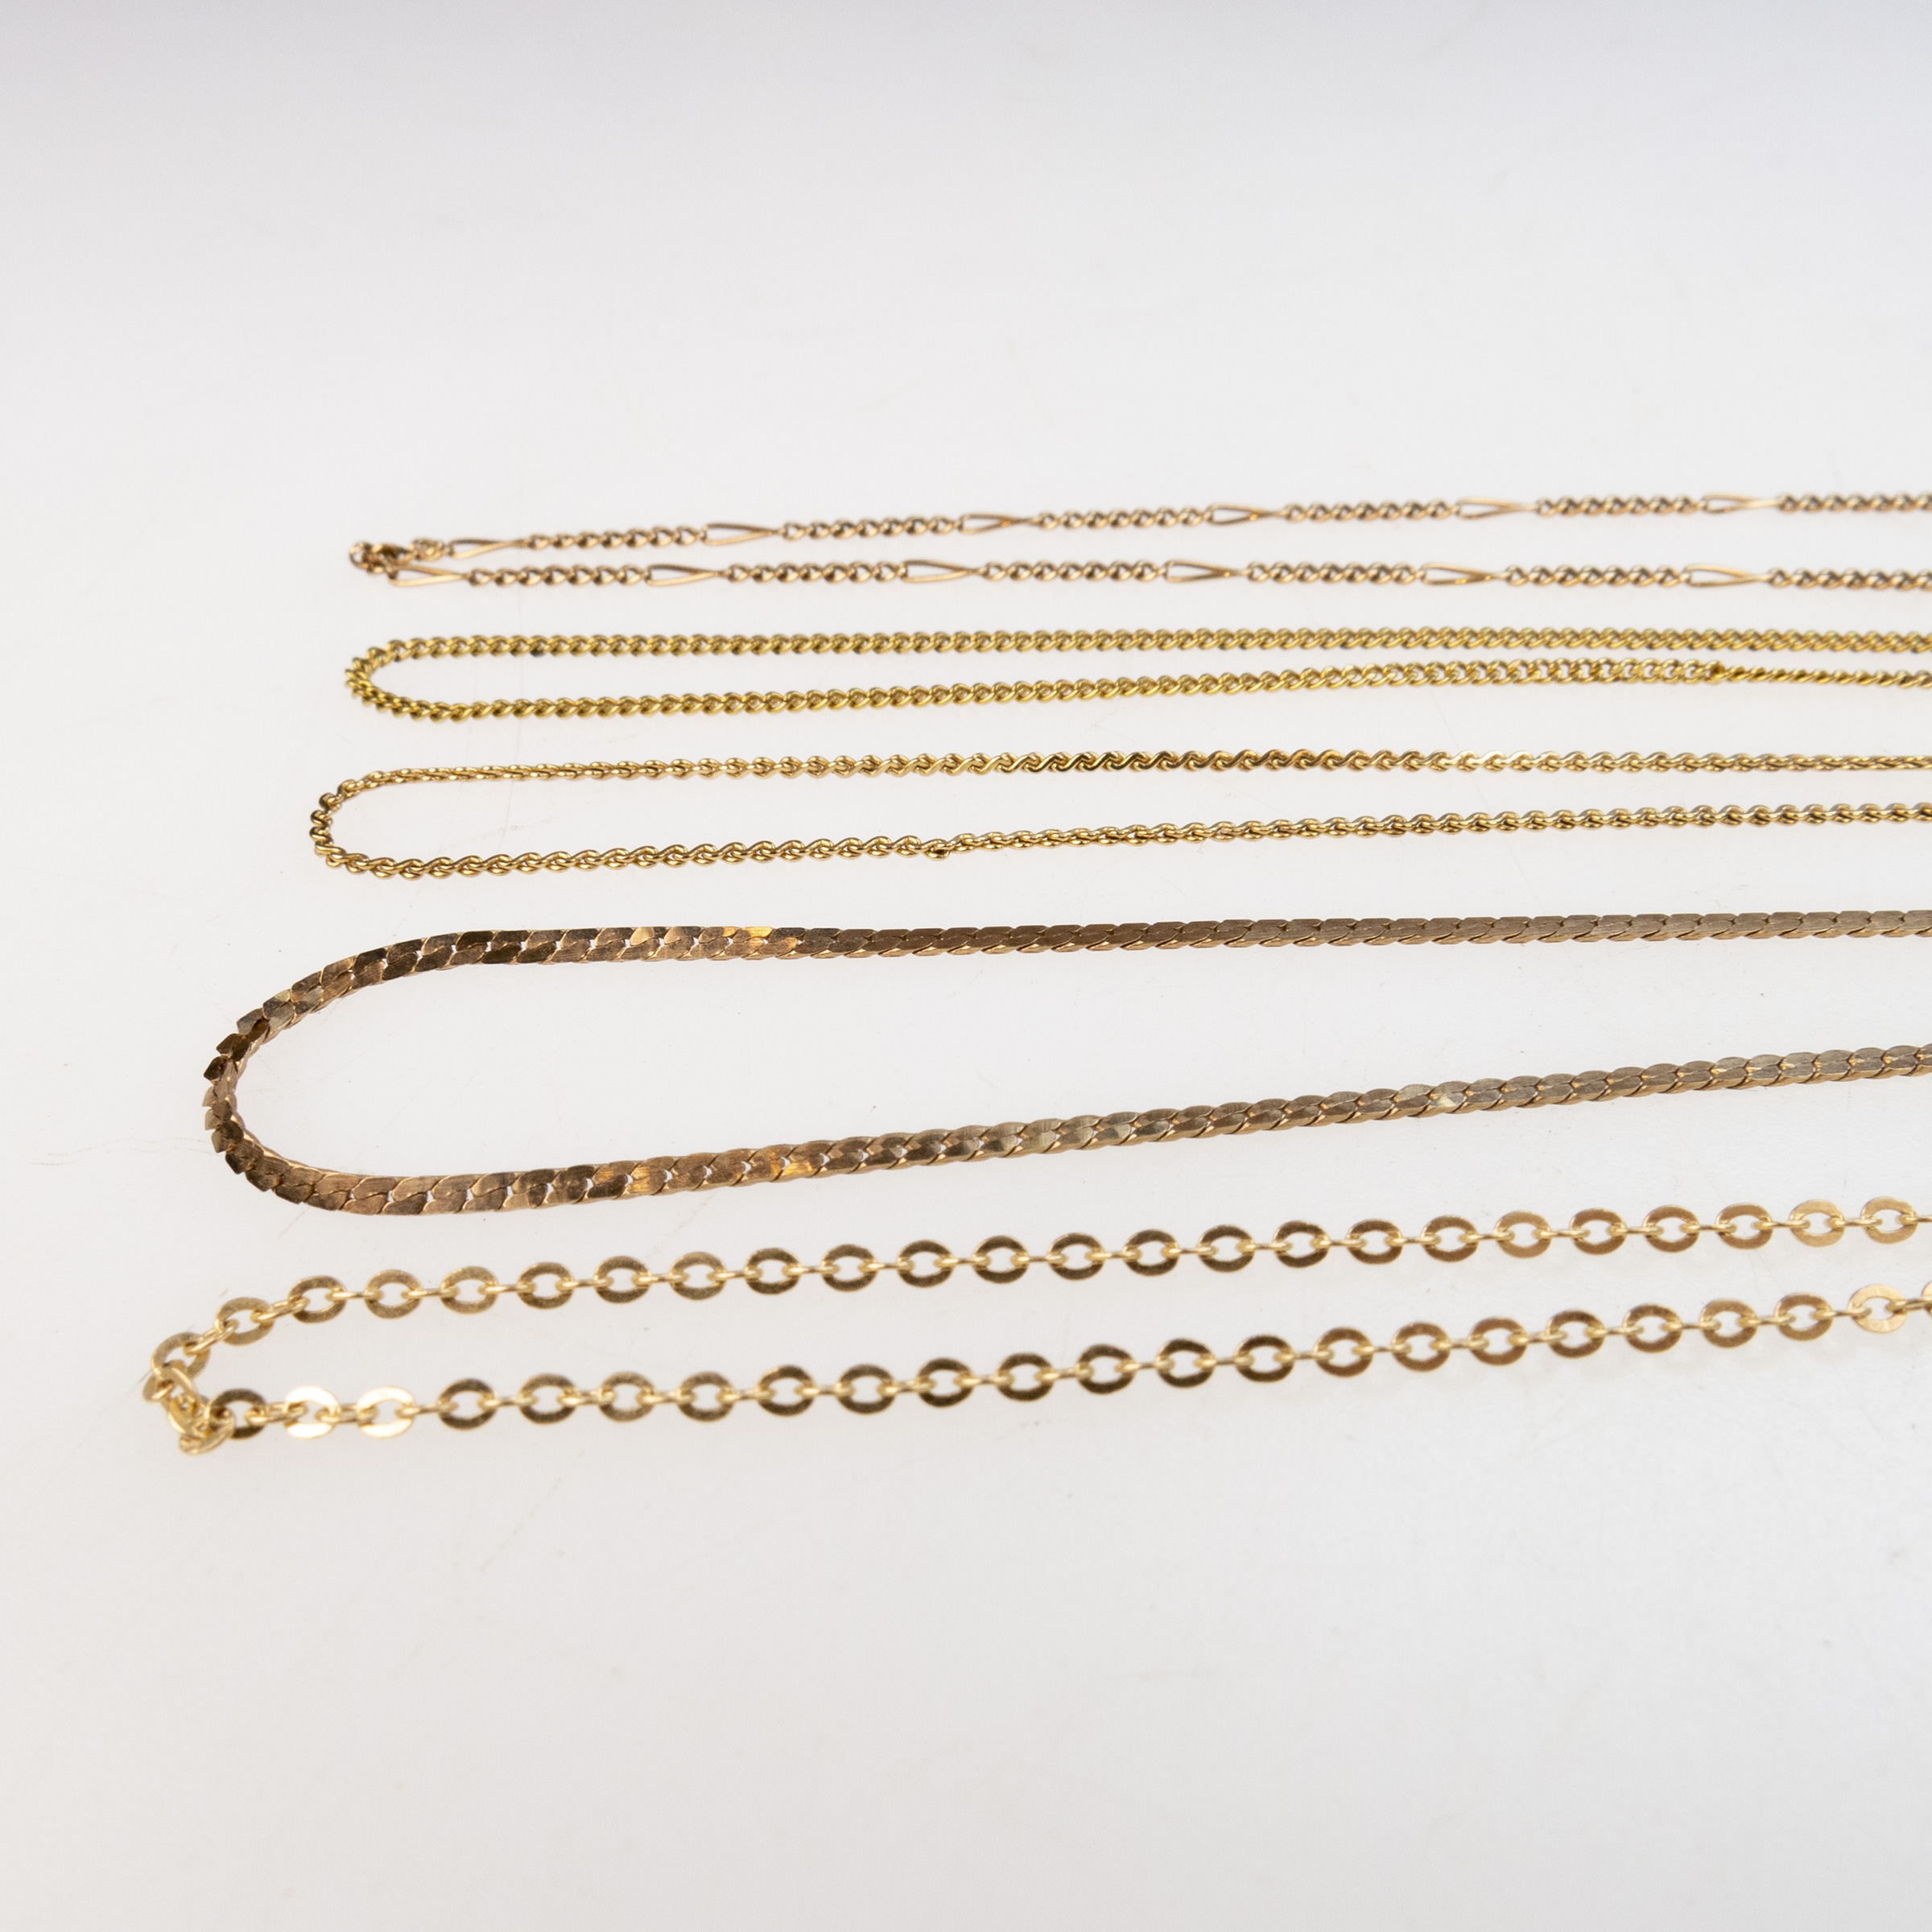 2 x 14k and 3 x 10k Yellow Gold Chains